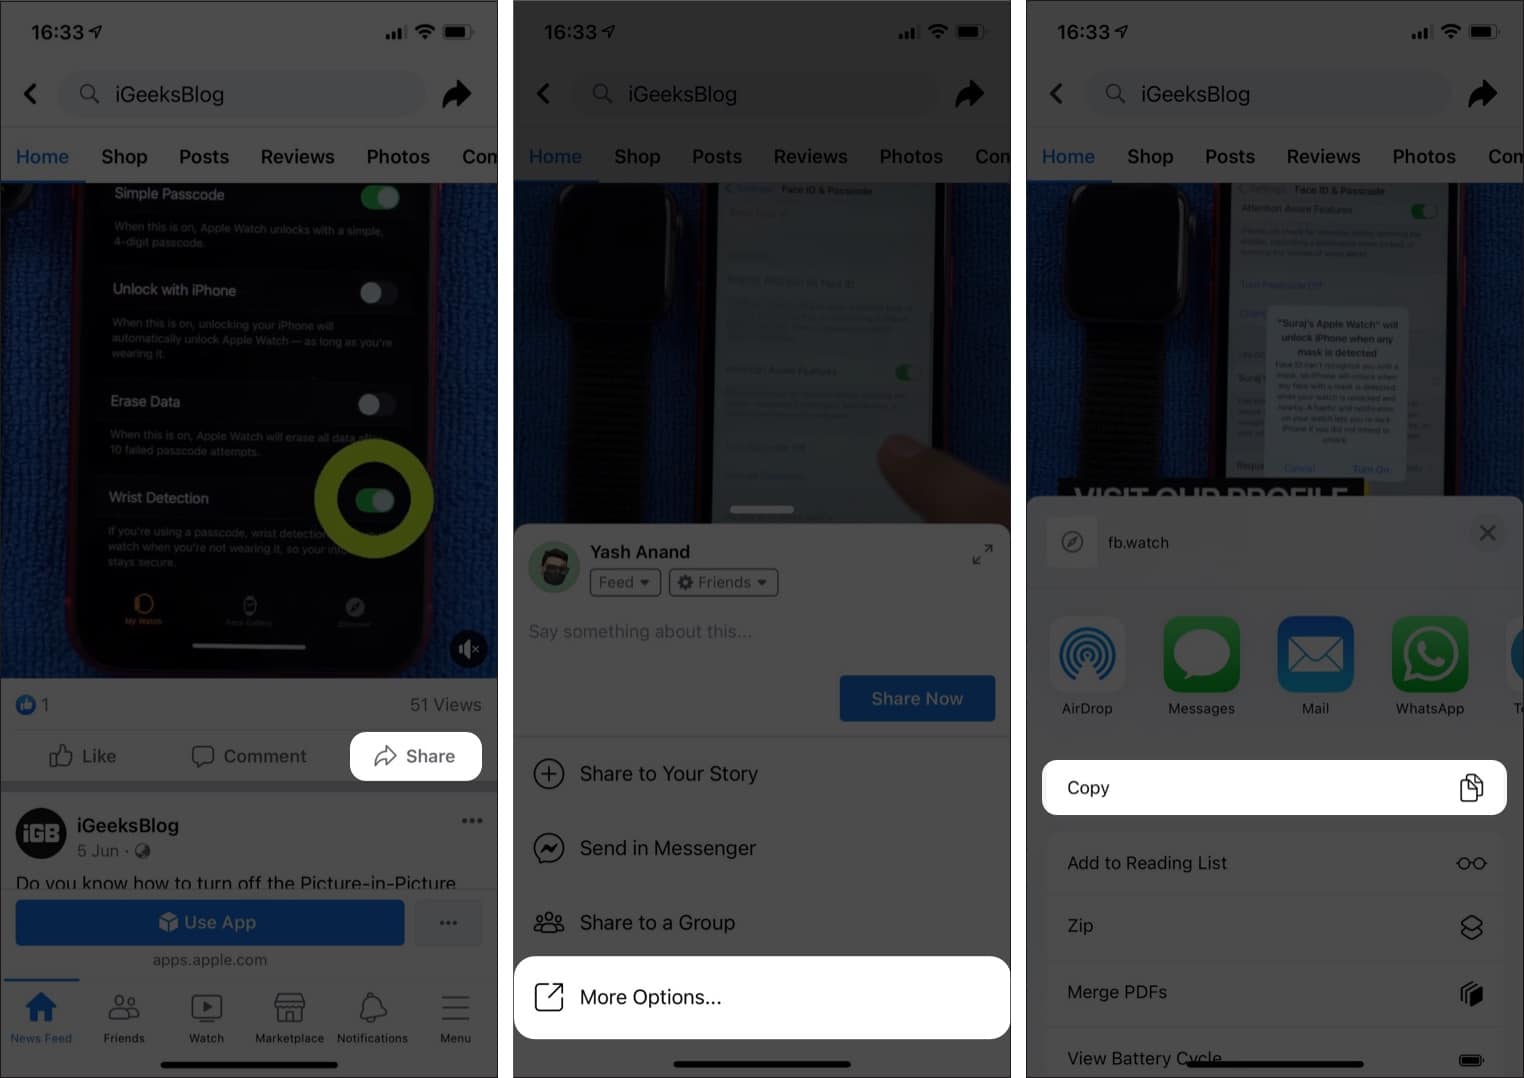 Find the Facebook video you want to download on iPhone